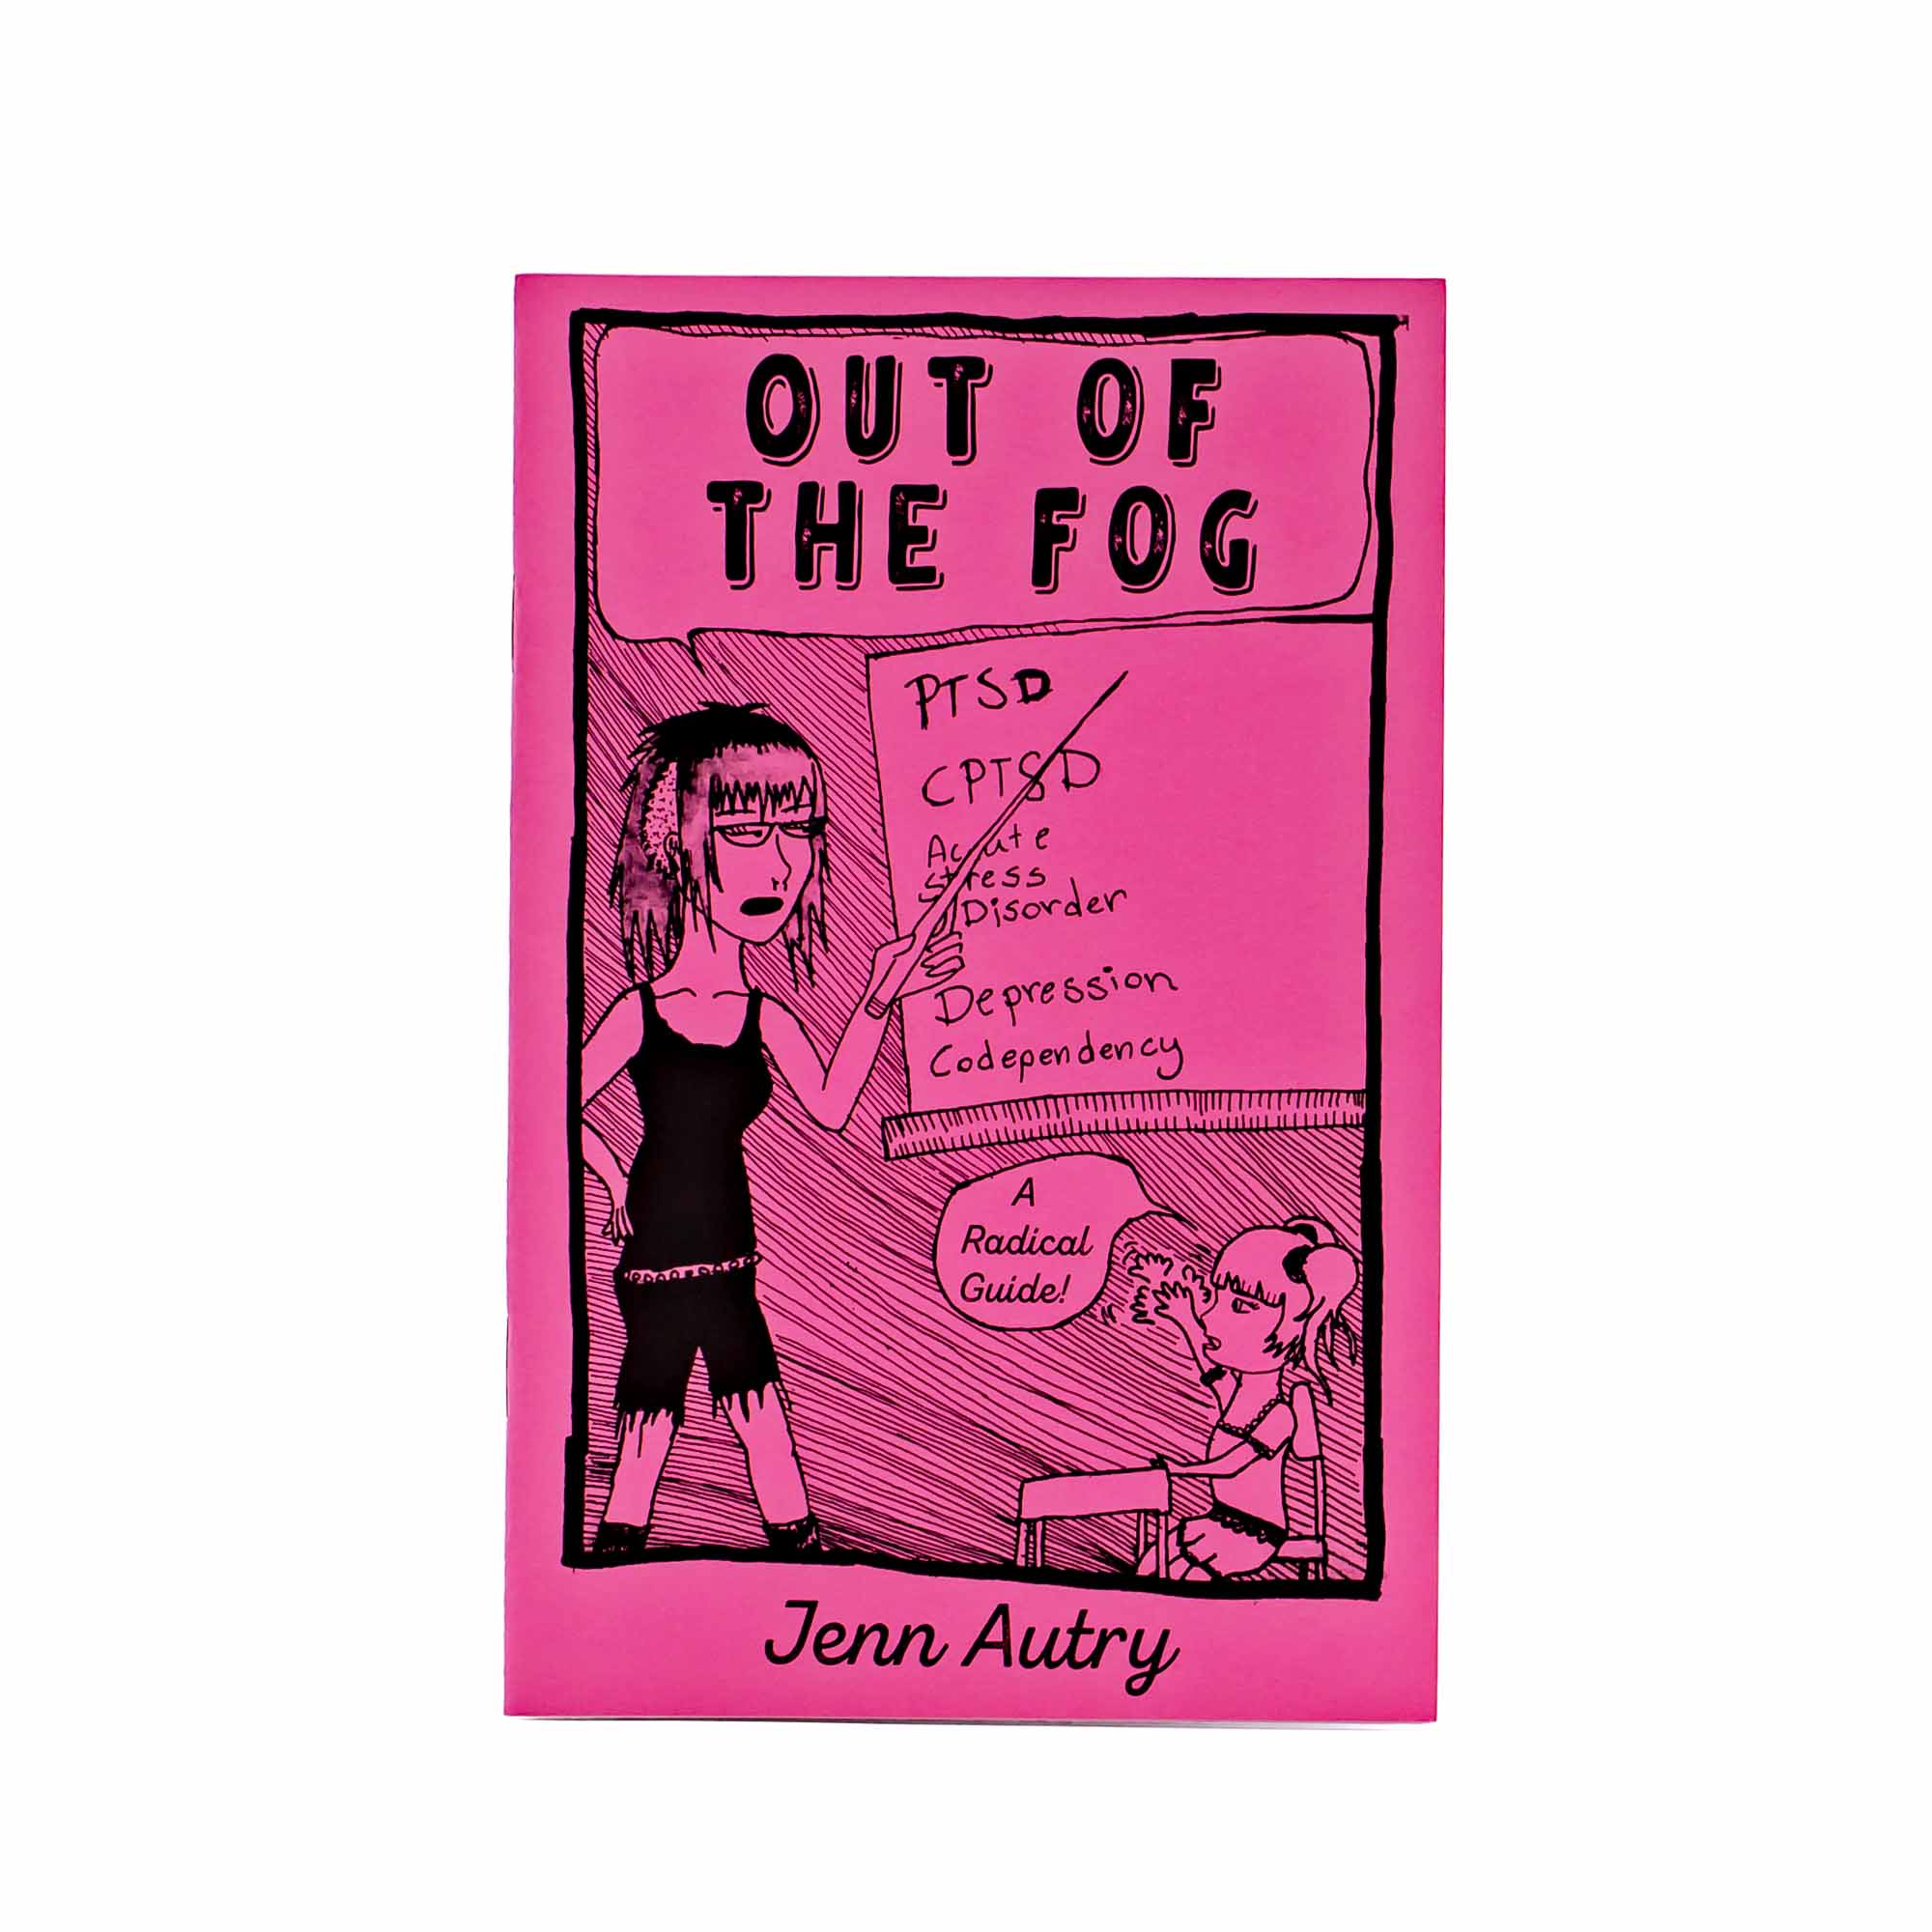 Out of the Fog by Jenn Autry - Mortise And Tenon